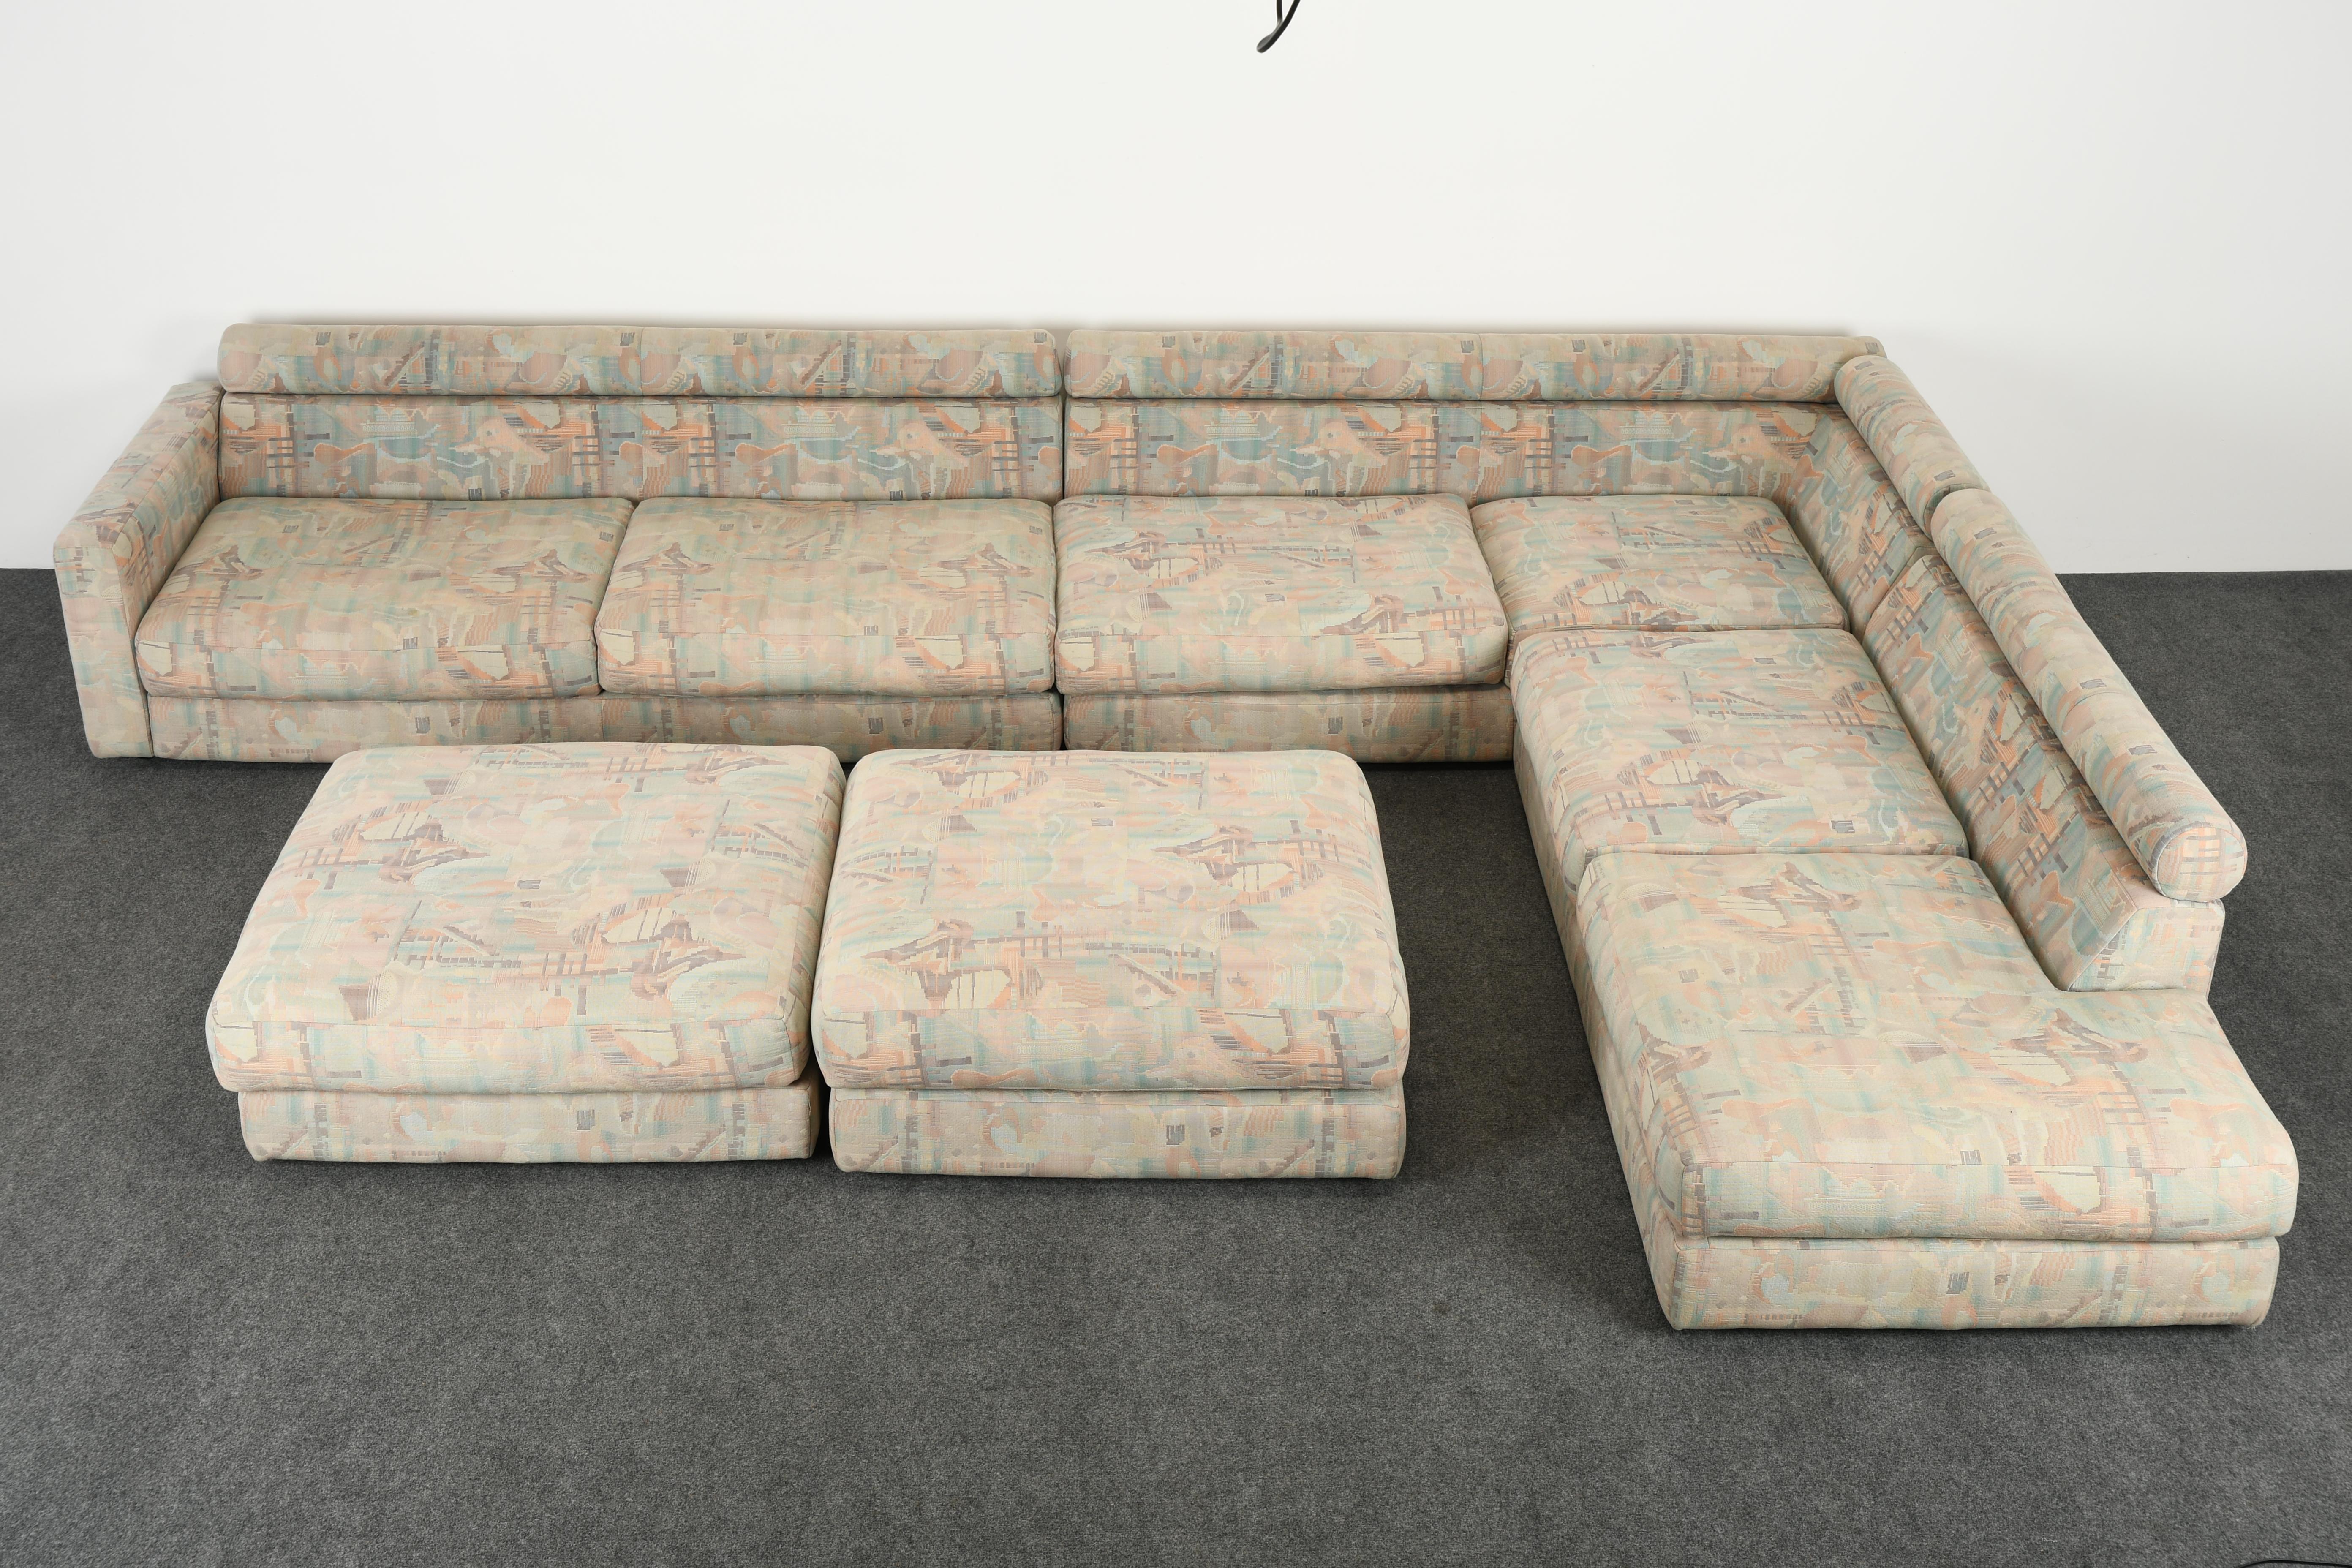 A fabulous monumental Roche Bobois sectional sofa with original fabric and pillows. This beautiful sofa can be used with its original upholstery temporarily however we are selling it as new upholstery recommended. It is a great form to reupholster